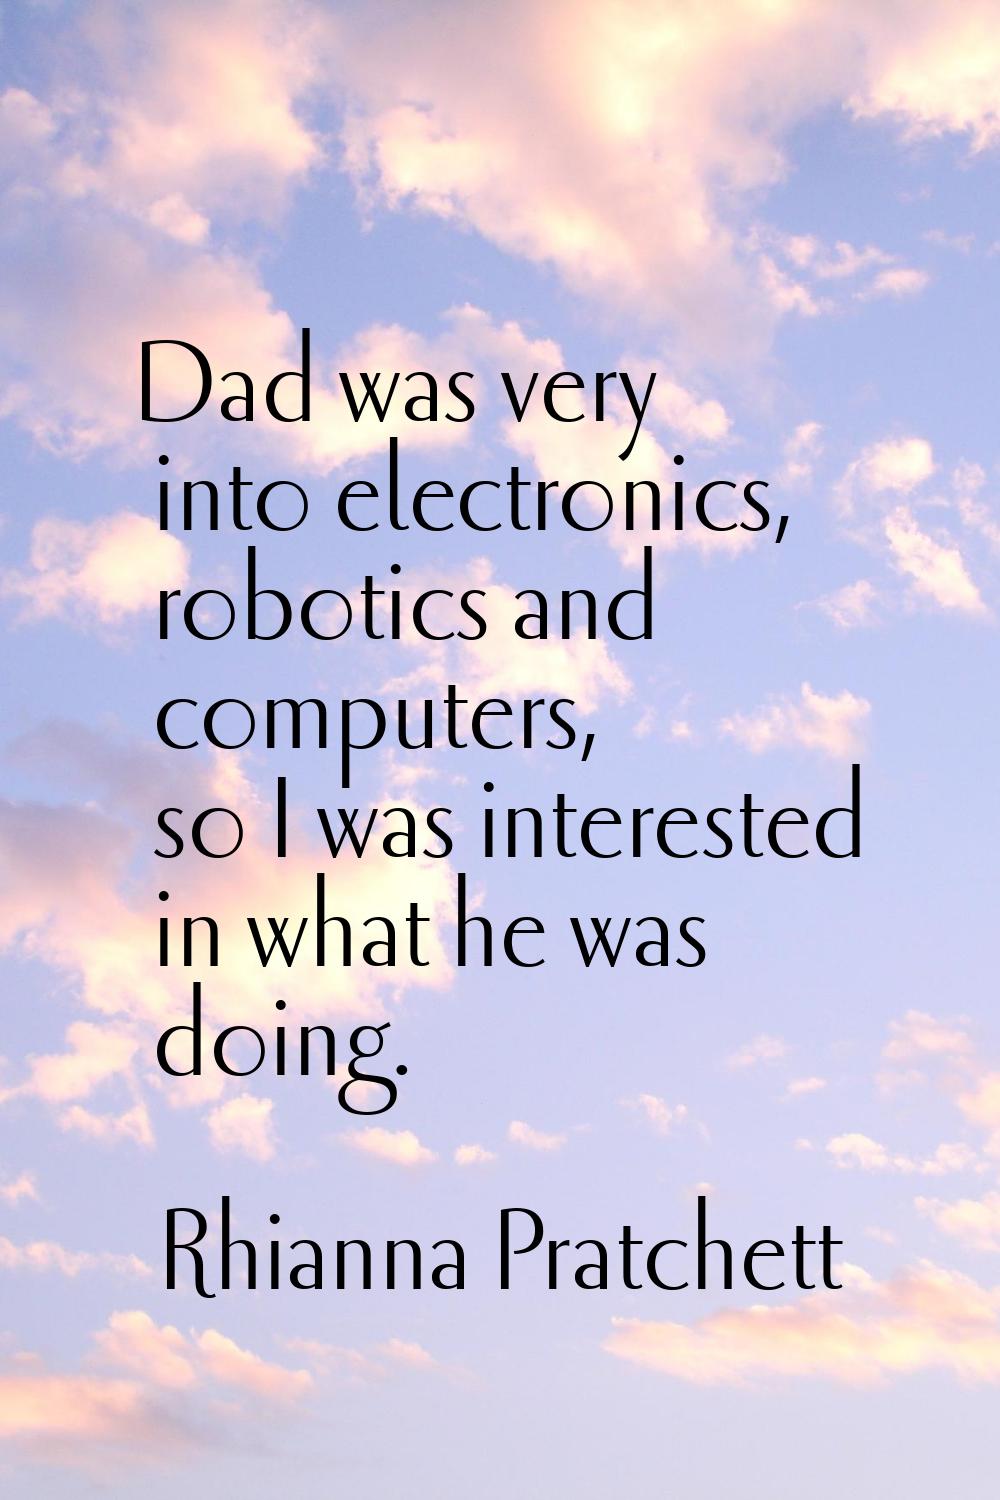 Dad was very into electronics, robotics and computers, so I was interested in what he was doing.